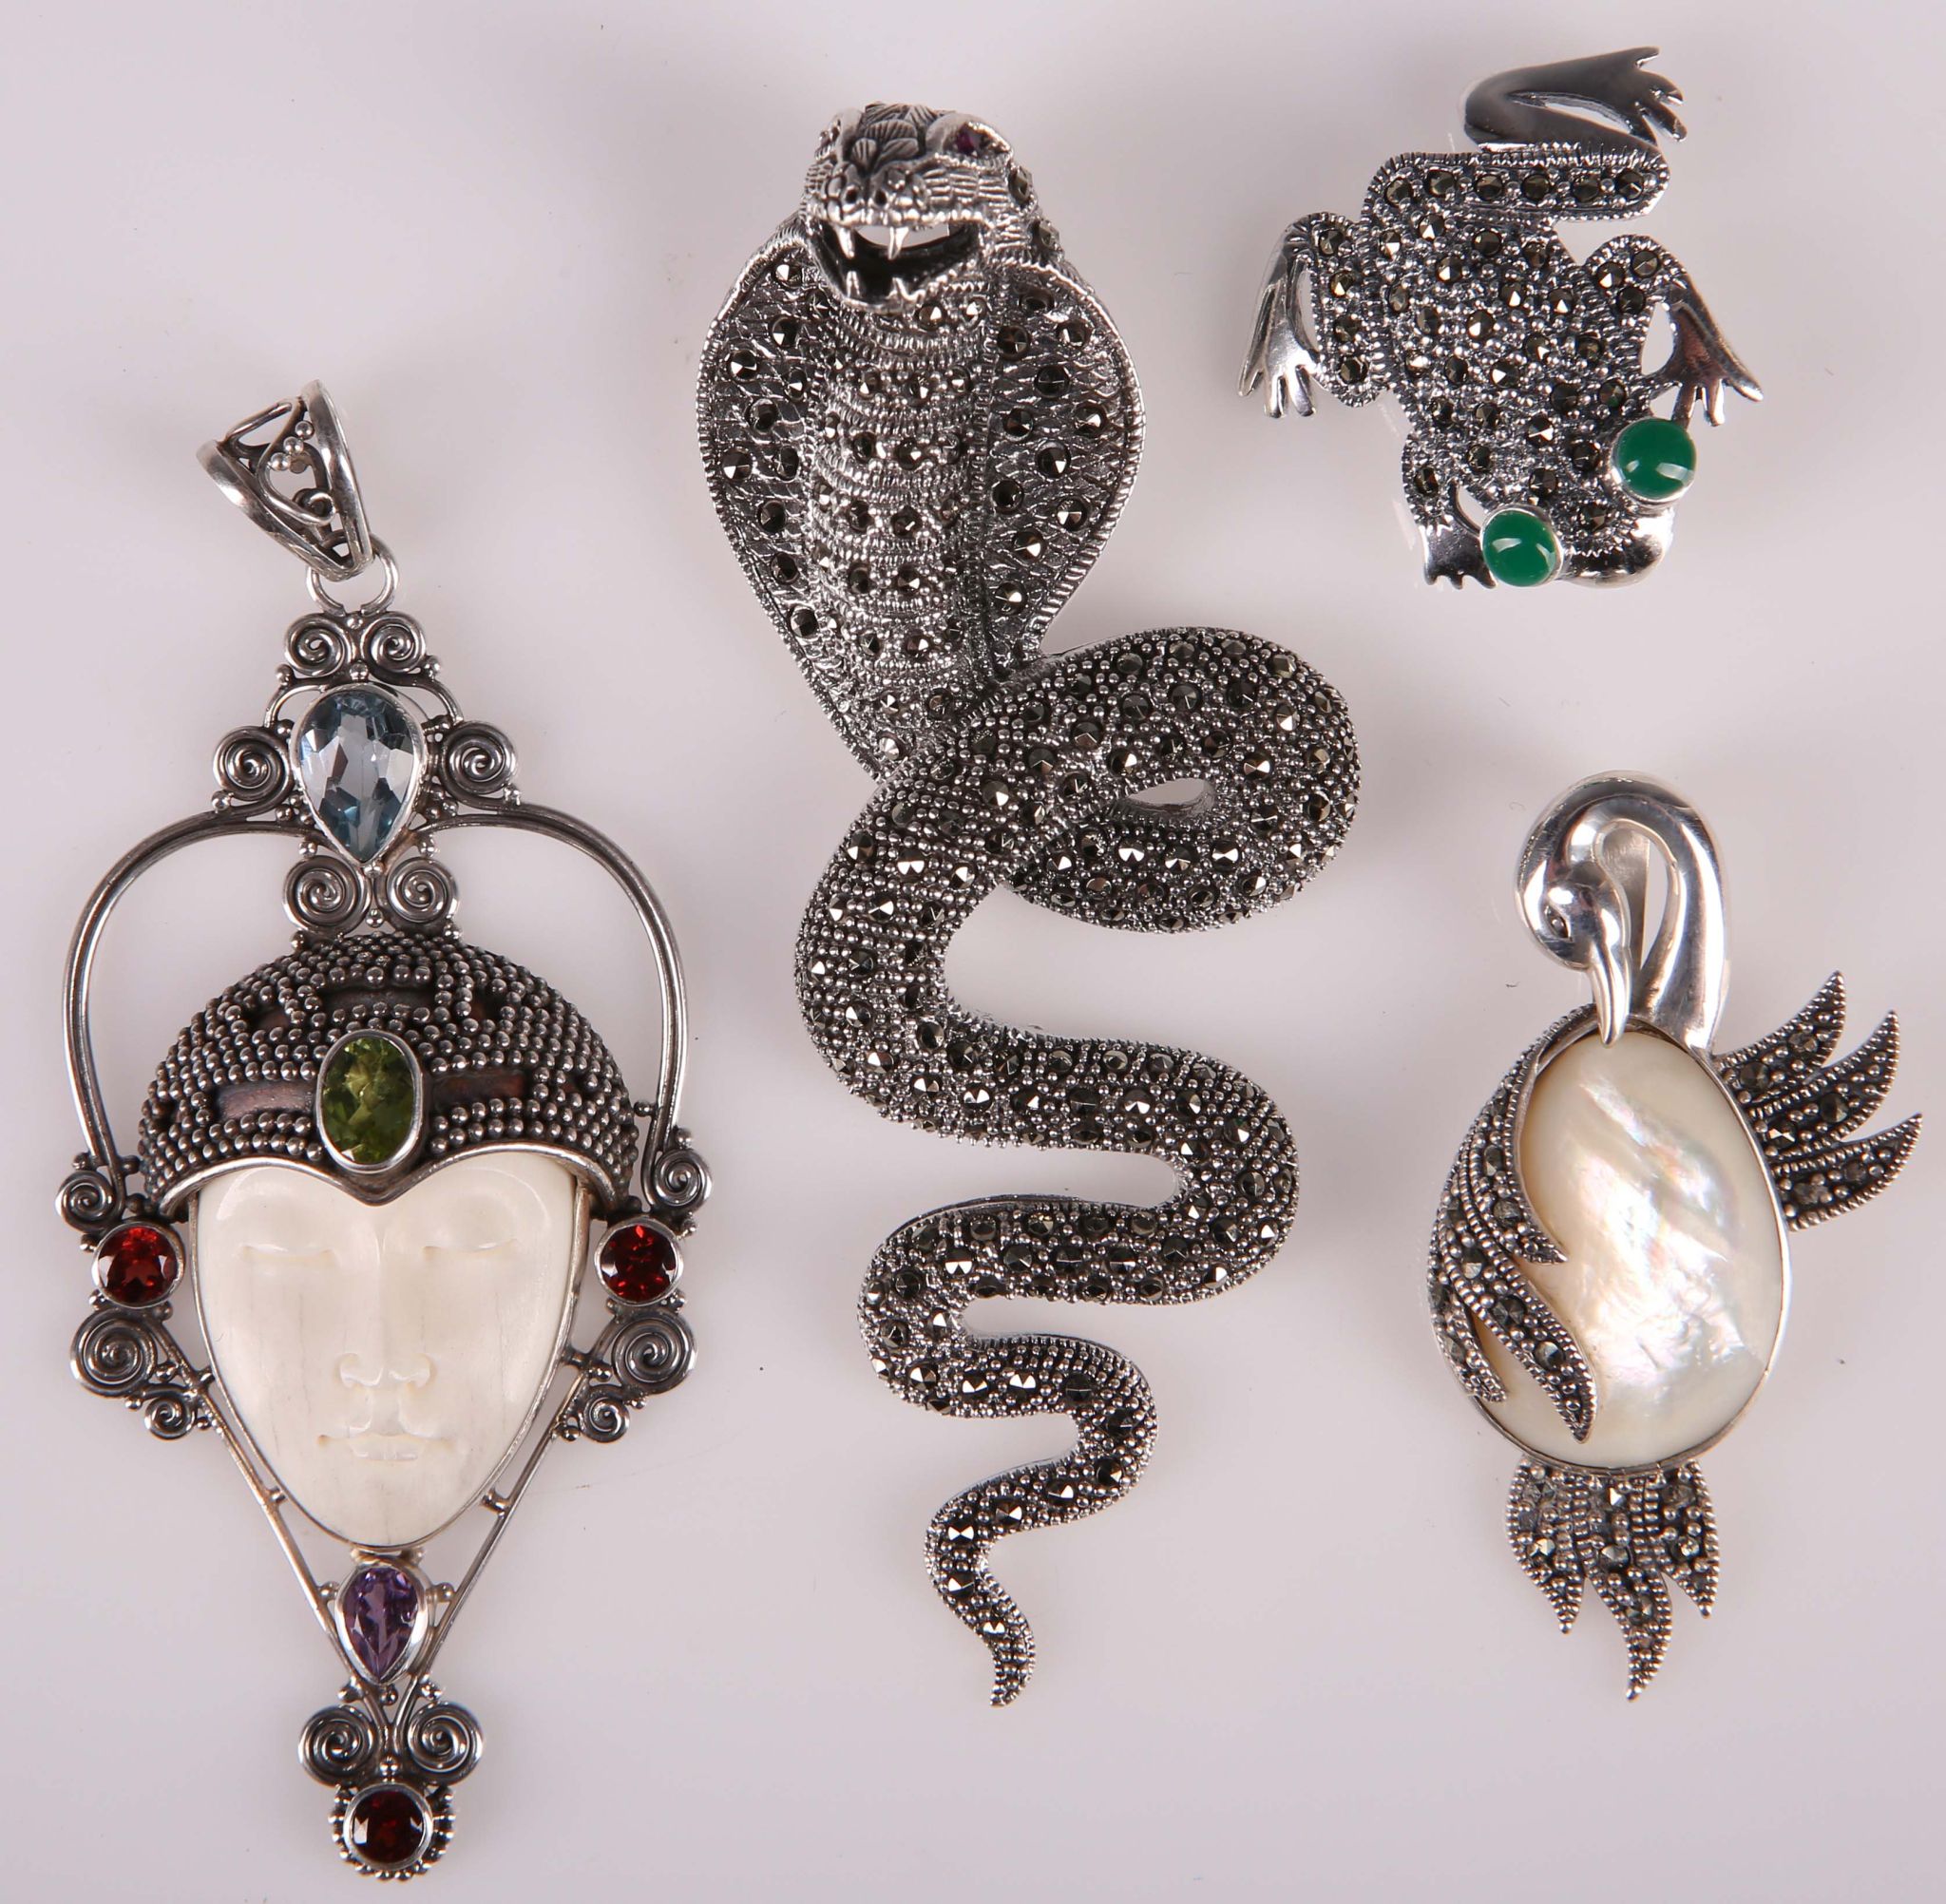 Four sterling silver .925 brooches and pendants in the form of snake, swan, frog, etc. (4)